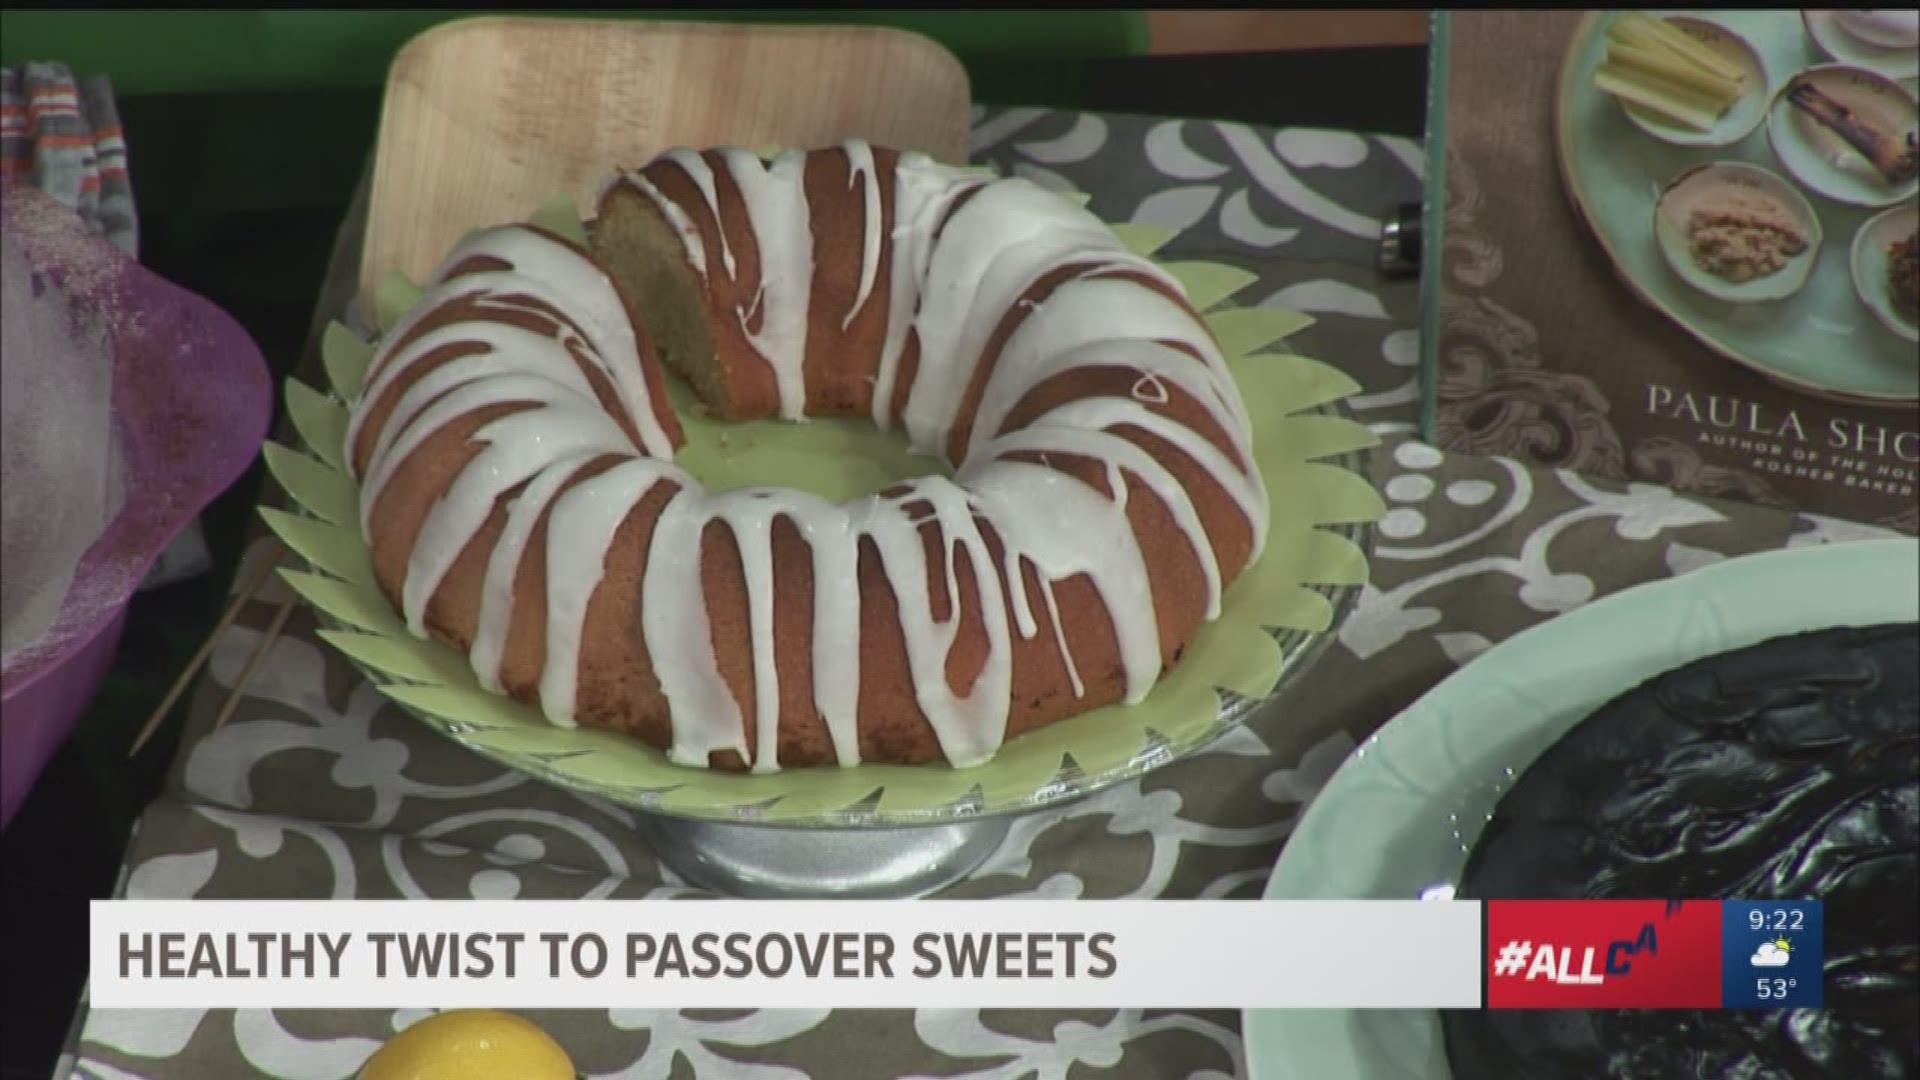 Pastry Chef and cookbook author Paula Shoyer has two cake recipes for Passover that have a healthy twist with the same great taste.